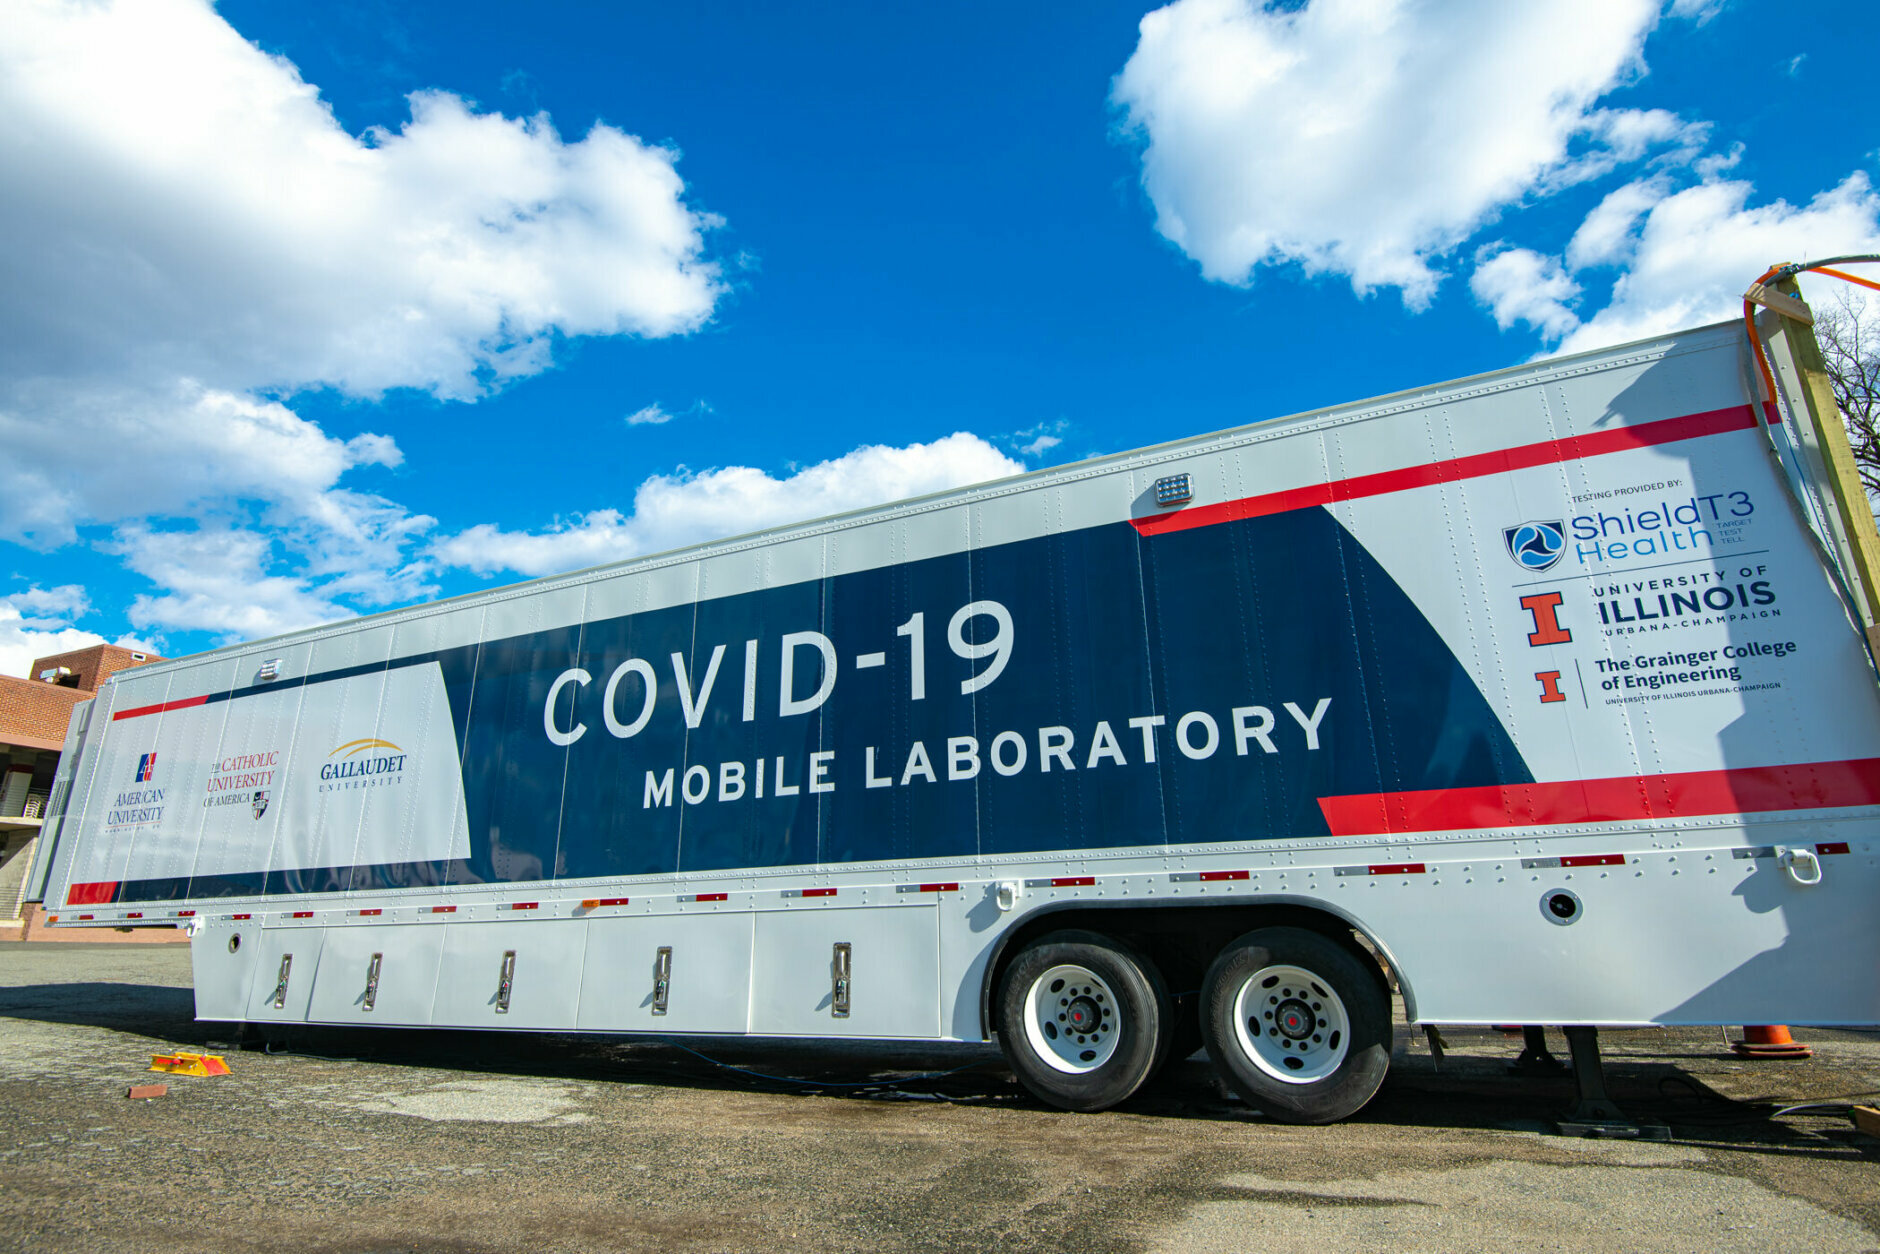 Partners American University, Catholic University of America, and Gallaudet University are launching a COVID mobile testing lab for their communities. It resides on the campus of Gallaudet University.